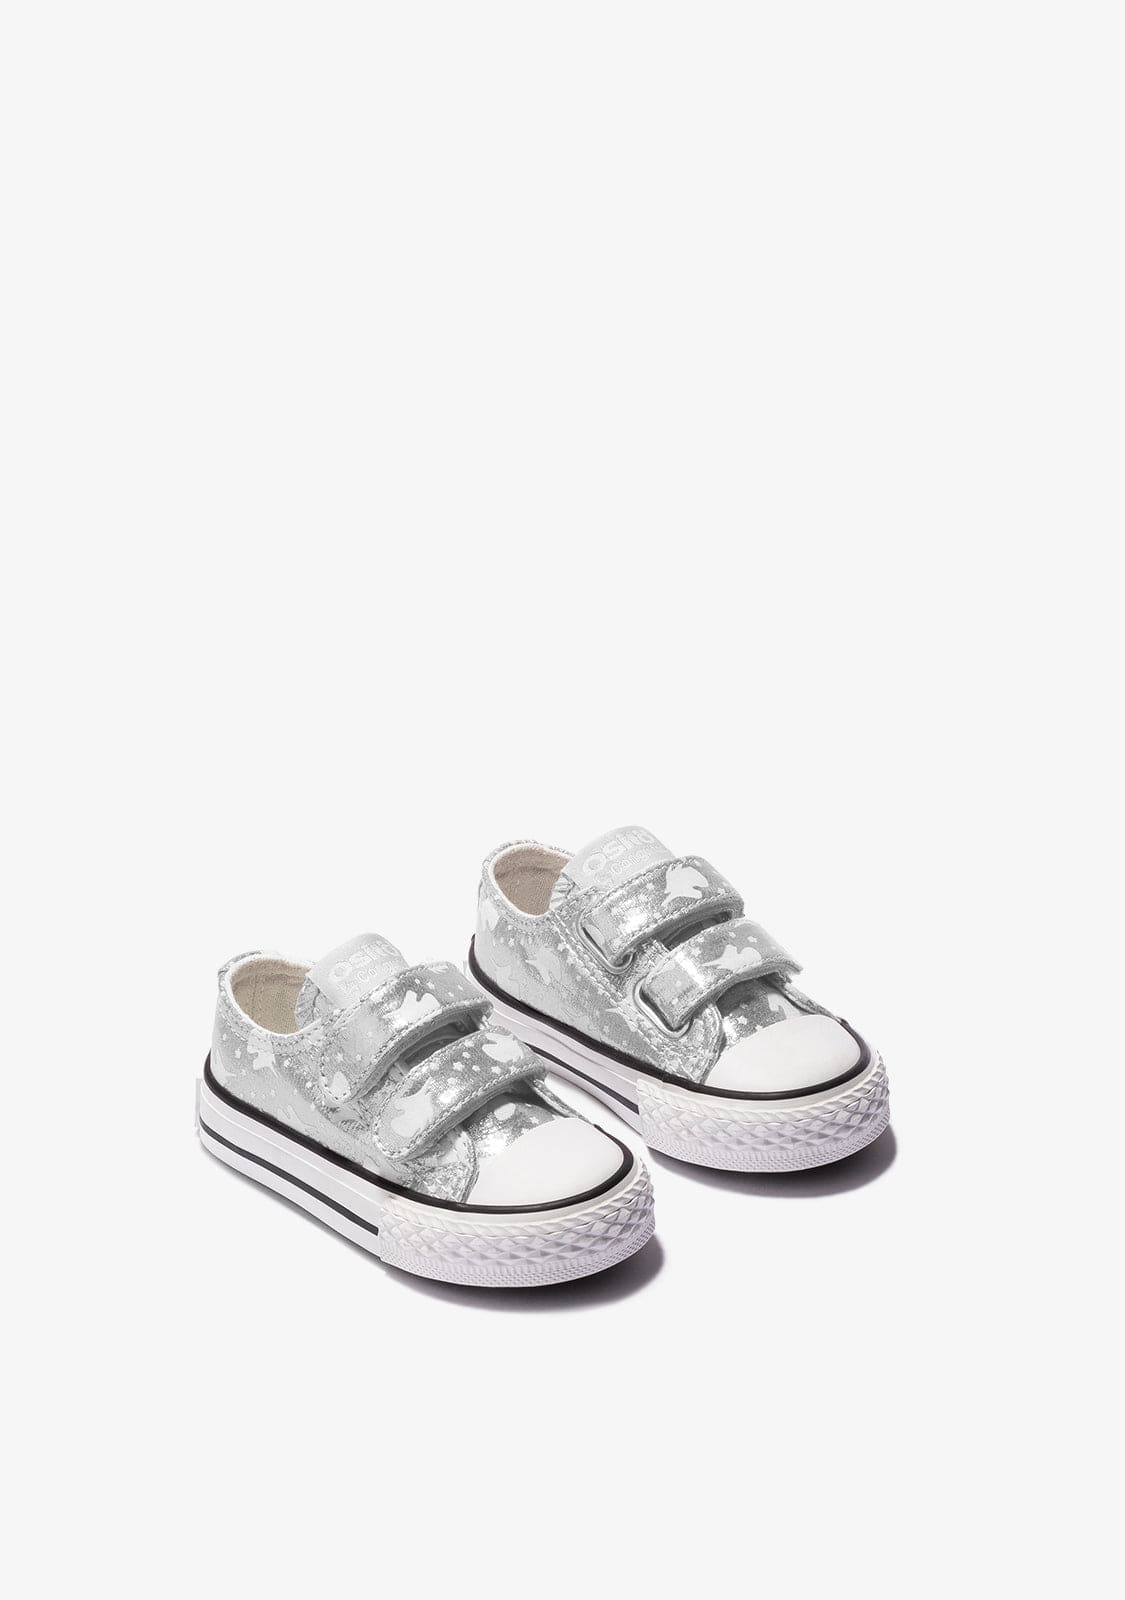 OSITO Shoes Baby's Silver Glows in the Dark Sneakers Canvas